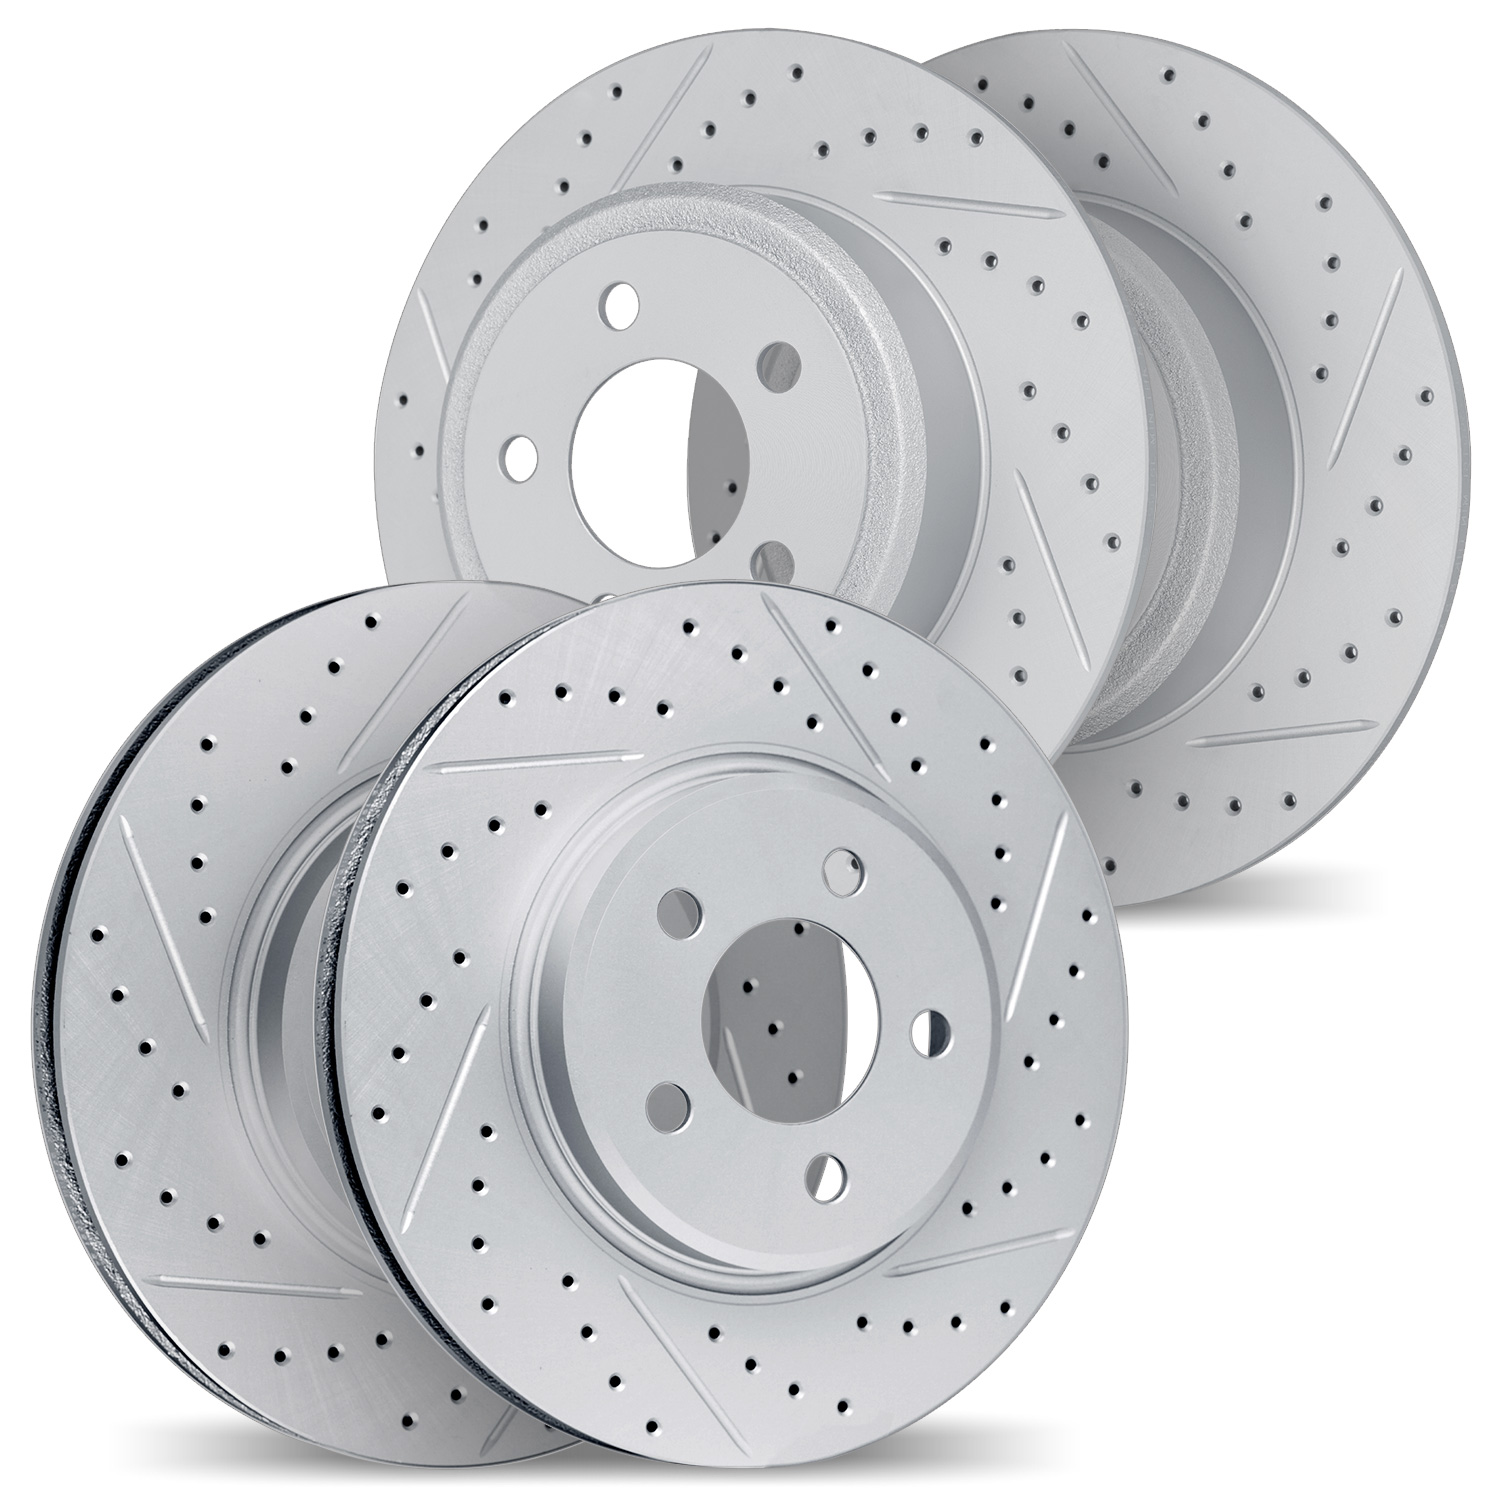 2004-54196 Geoperformance Drilled/Slotted Brake Rotors, 2003-2005 Ford/Lincoln/Mercury/Mazda, Position: Front and Rear